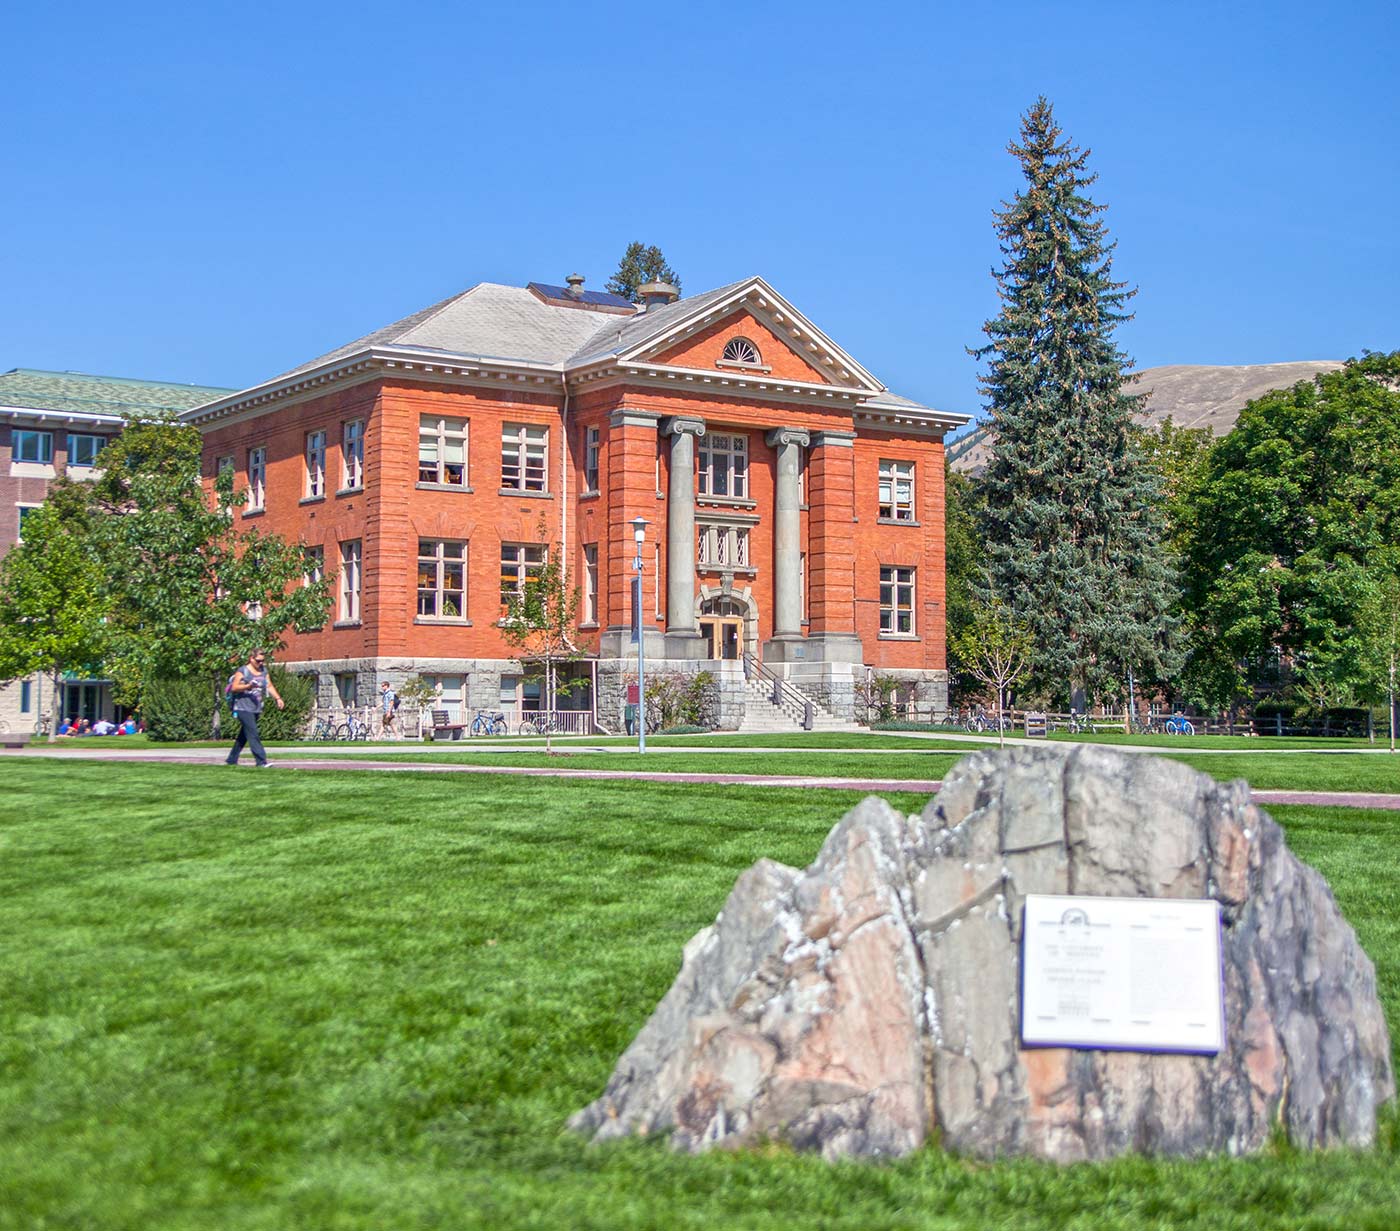 The Jeanette Rankin Hall on the University of Montana Campus in Missoula, Montana